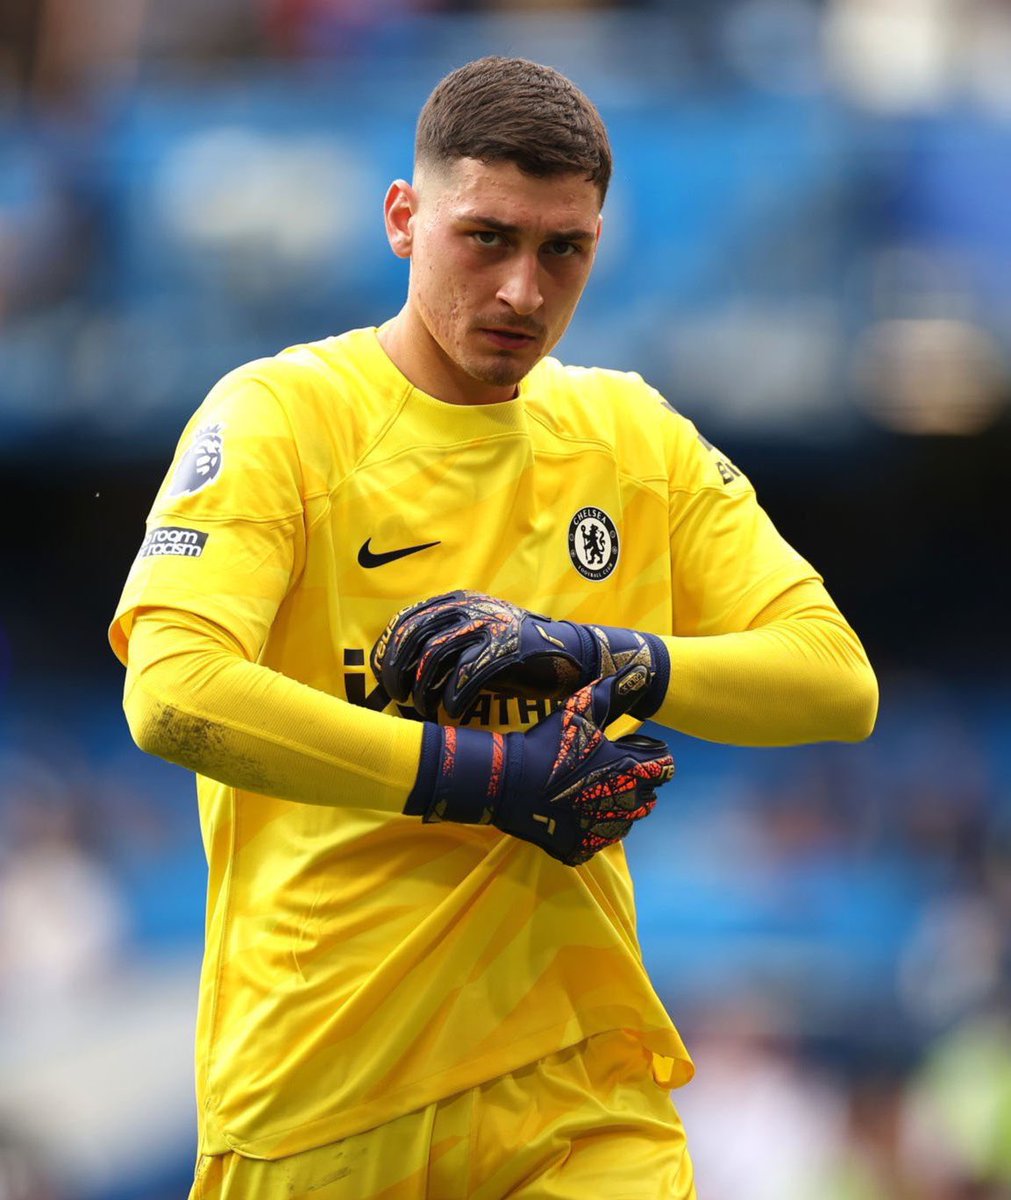 🇷🇸 Djordje Petrovic during the 2023/24 season for Chelsea in all competitions: - 101 successful saves - 97 successful throws - 24 successful high-claims - 20 crosses stopped - 20 times acted as sweeper - 655 successful passes - 126 successful long balls 1st season. ✅ #CFC